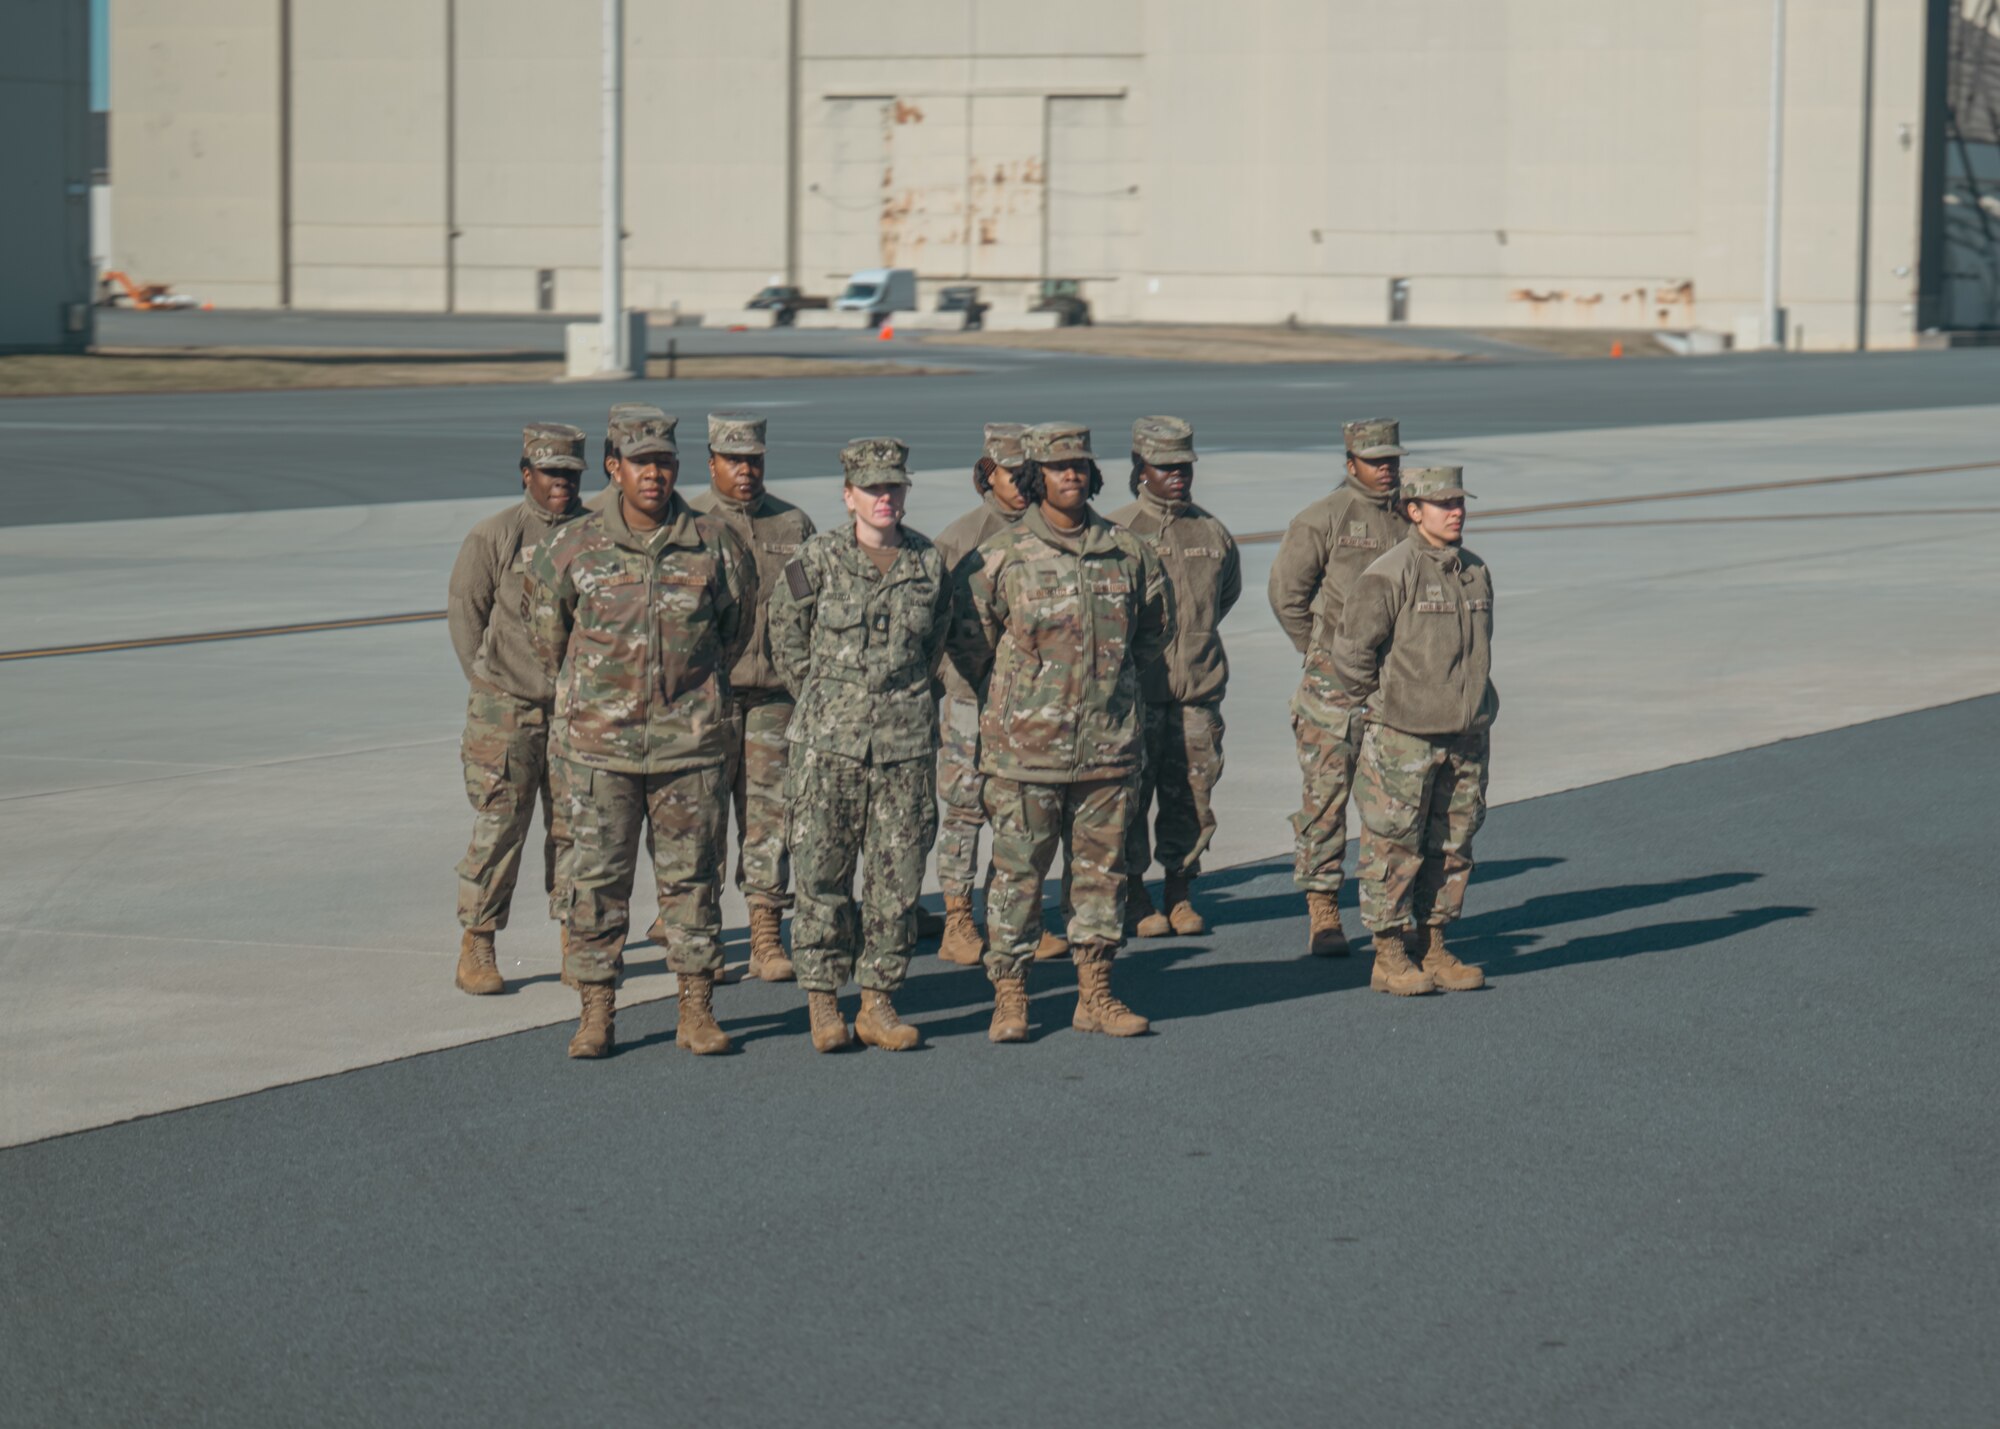 A group of female service members stand at parade rest on a flightline.